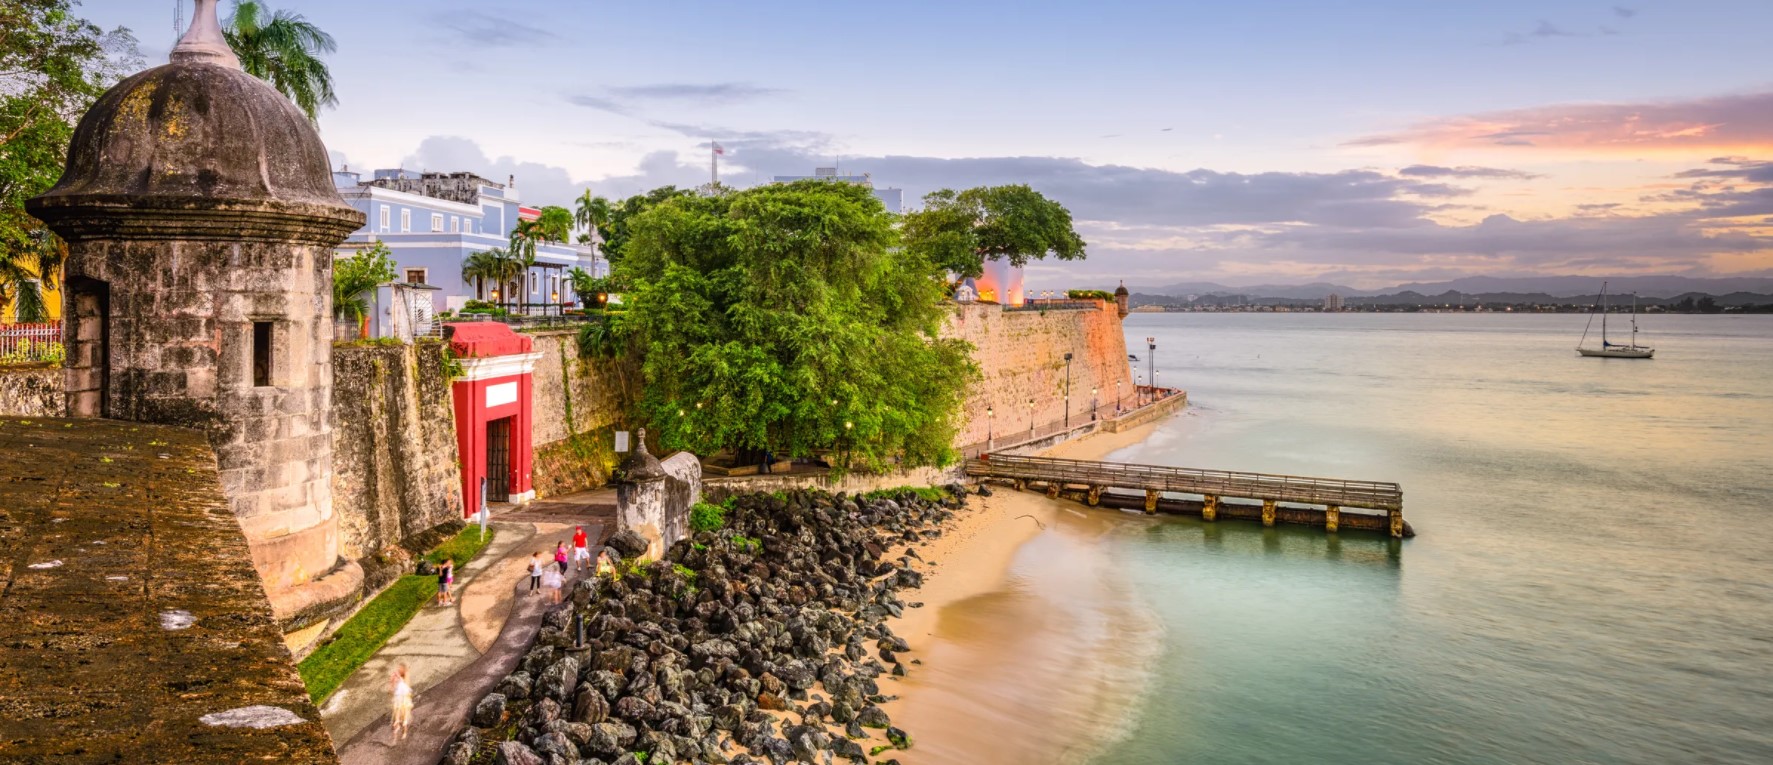 Do you need a Passport to go to Puerto Rico and Vieques?